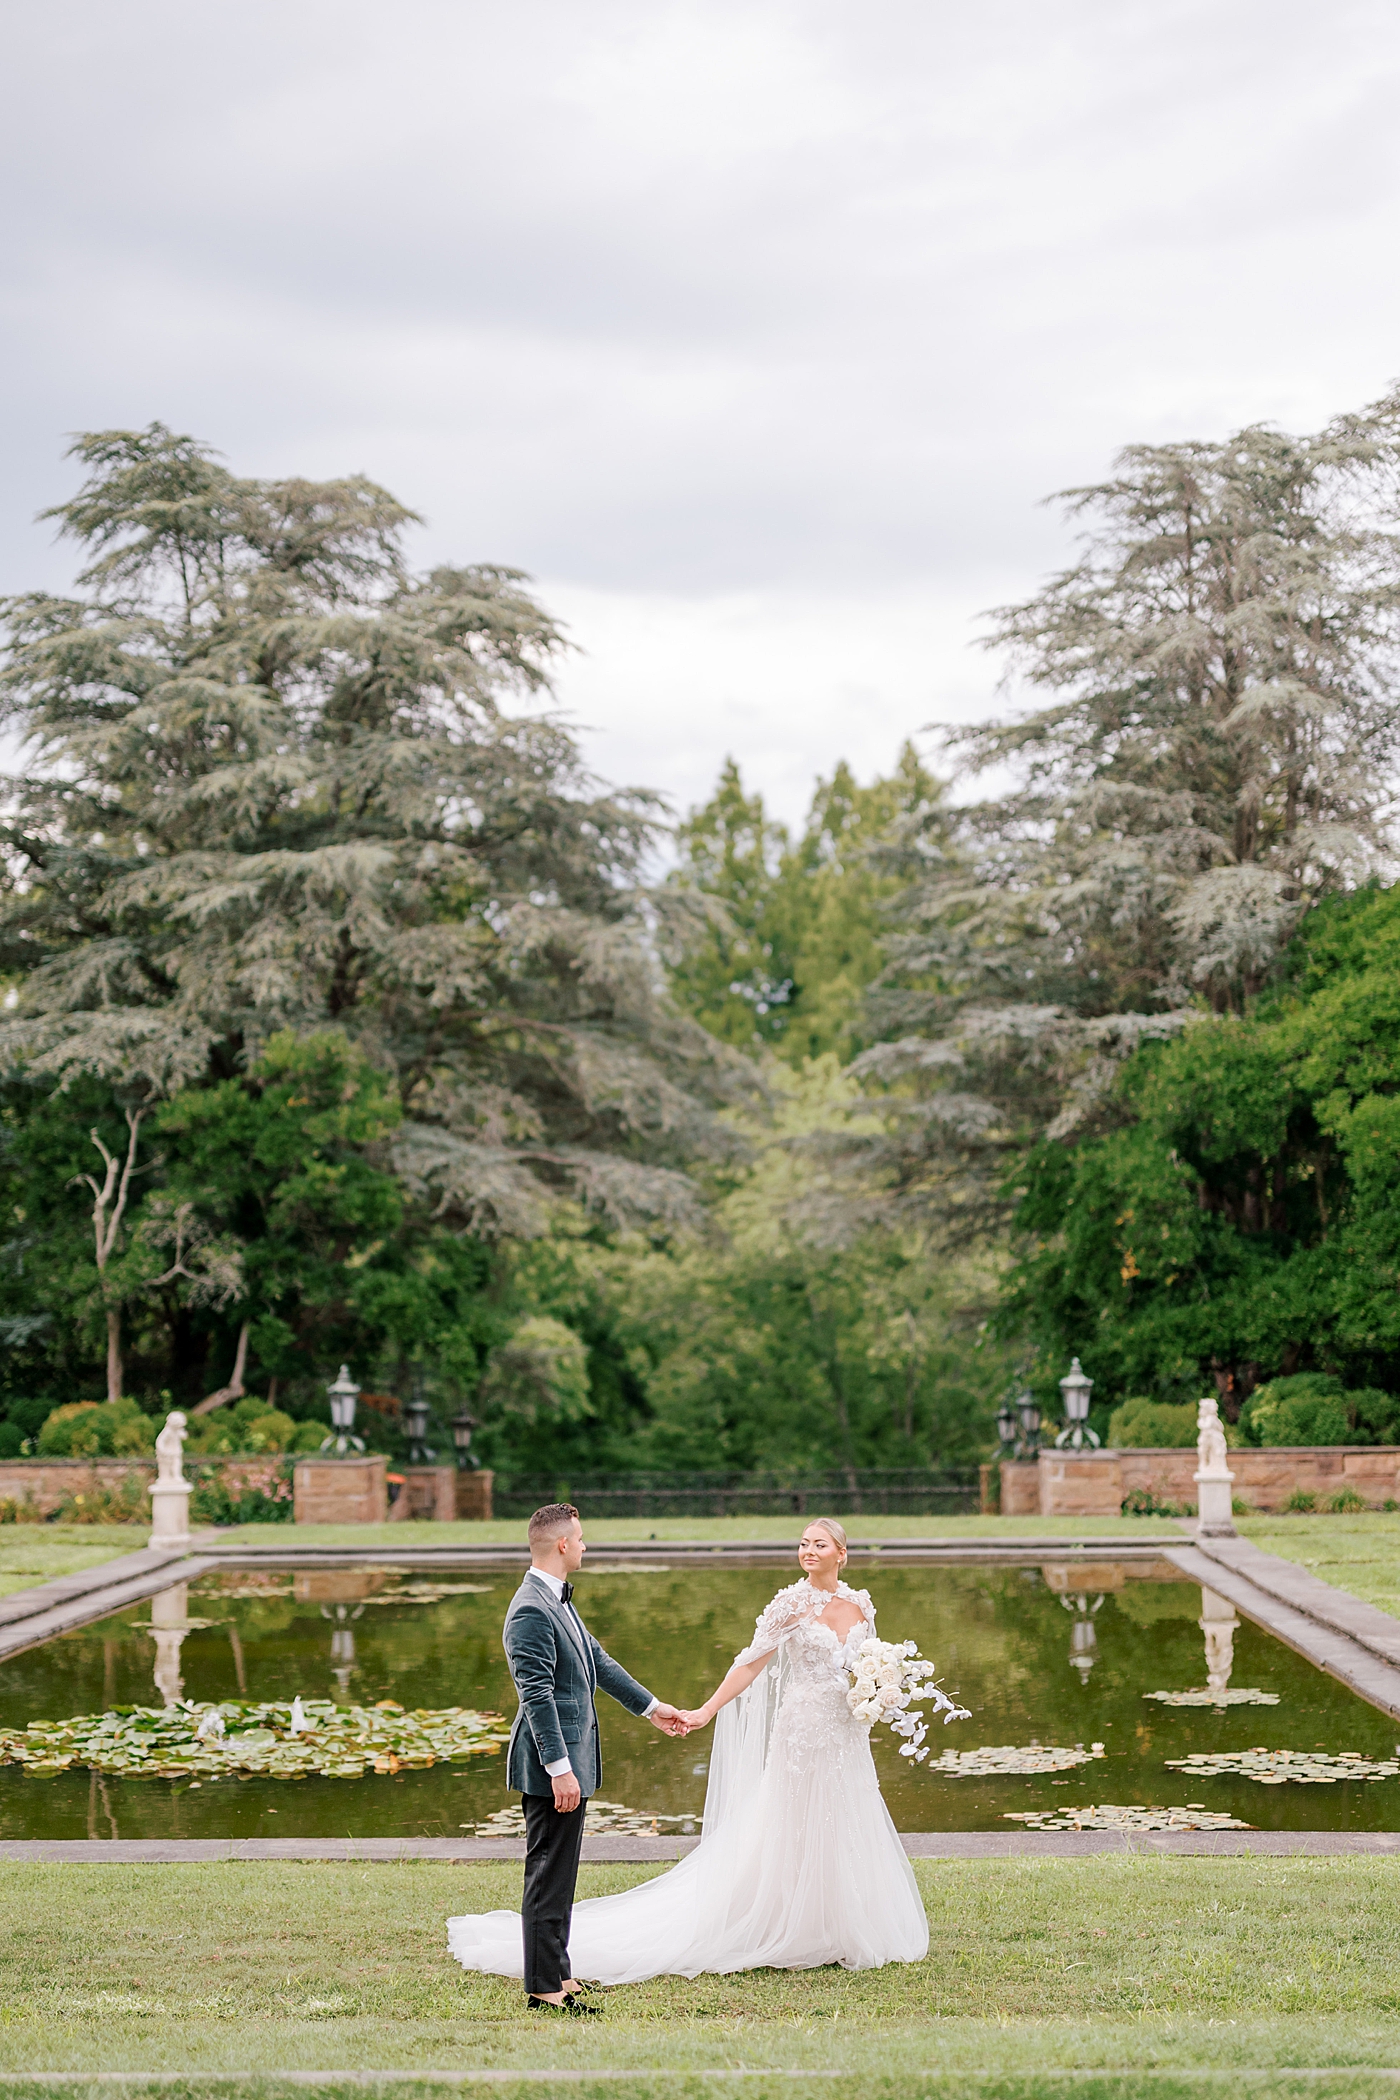 Bride and groom walking near a pond | Image by Hope Helmuth Photography